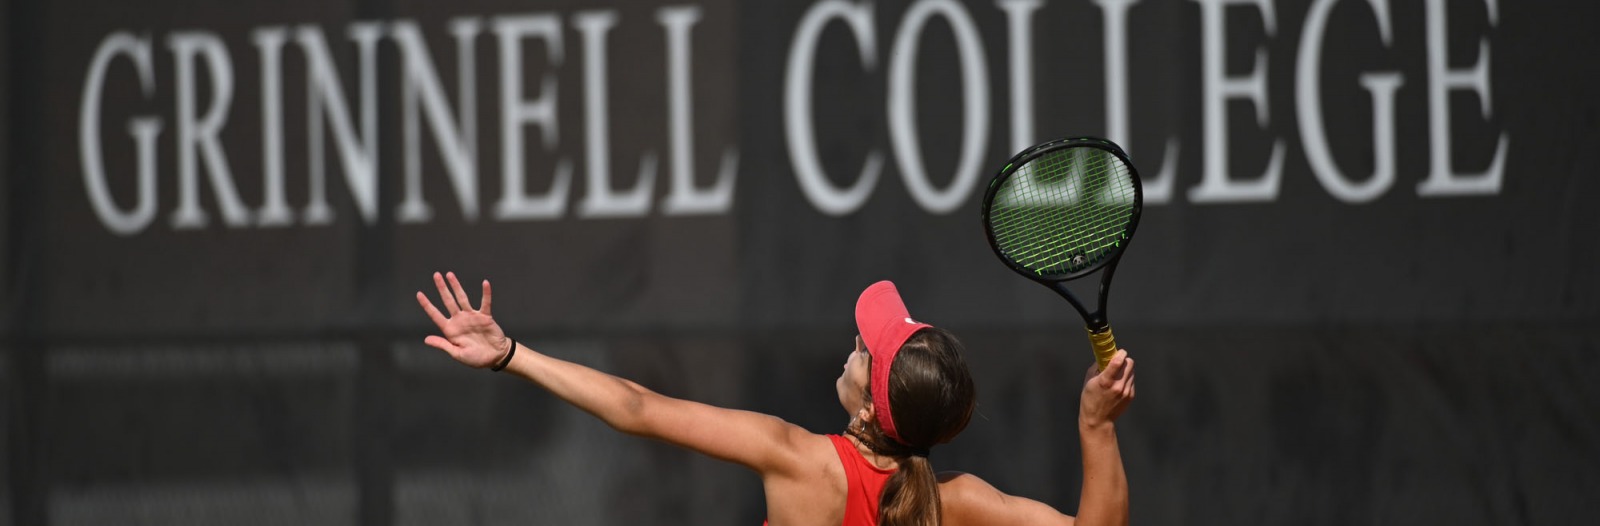 tennis player serves in front of ‘Grinnell College’ sign